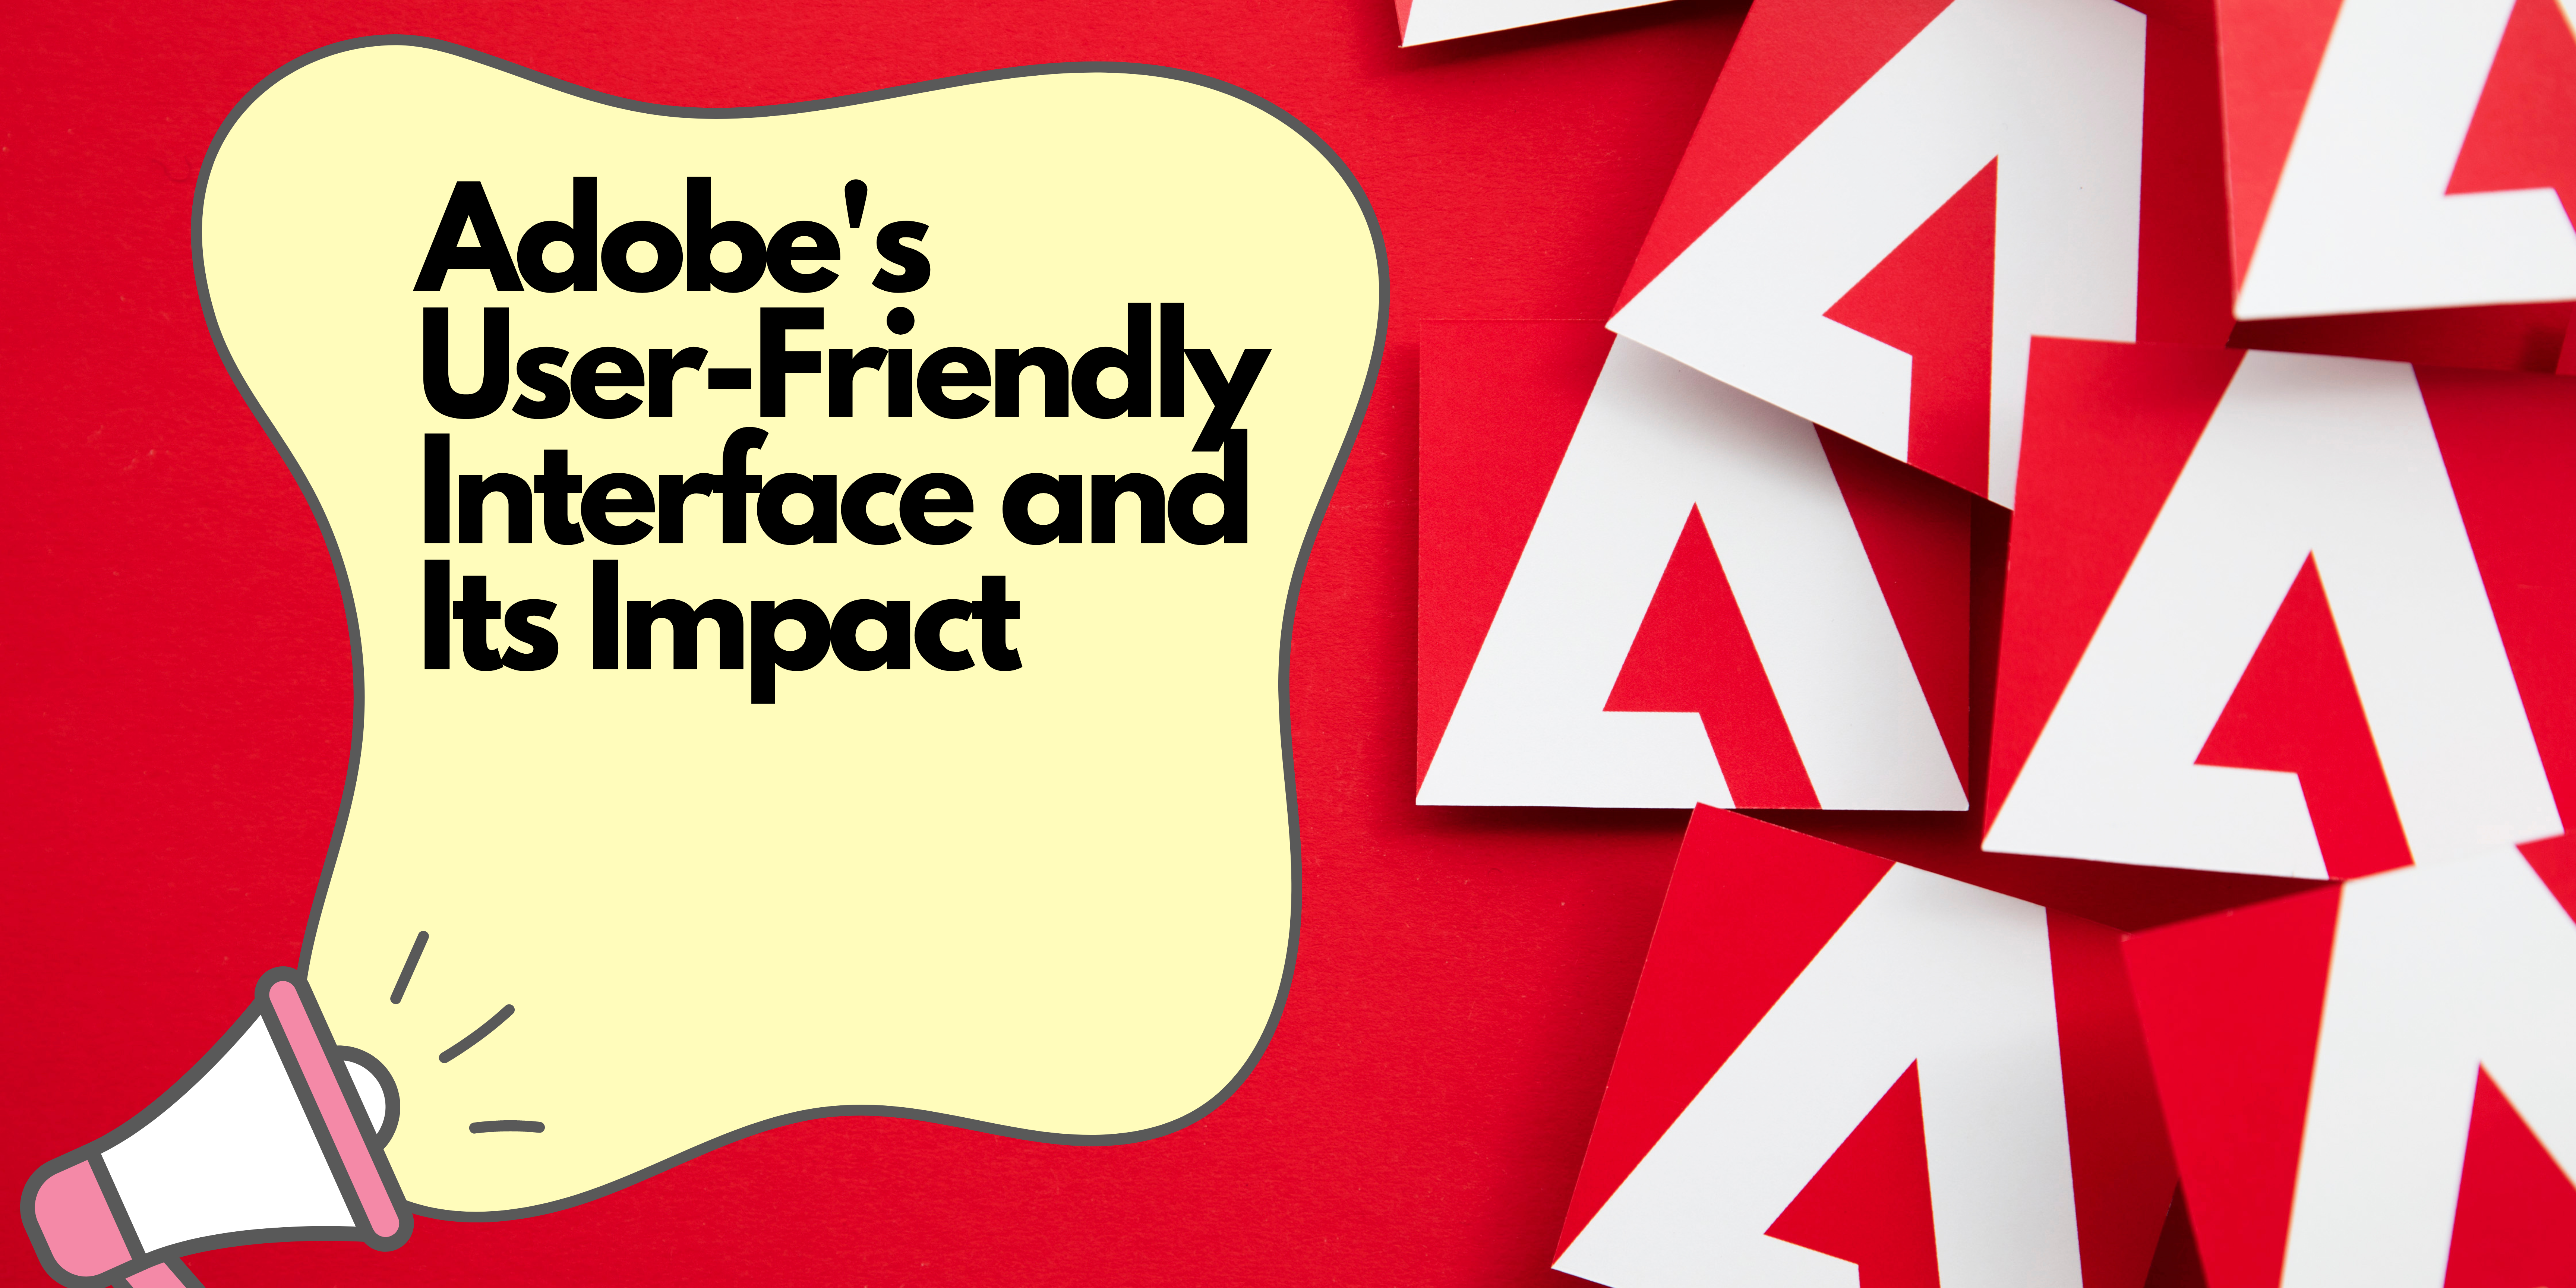 Adobe’s User-Friendly Interface and Its Impact